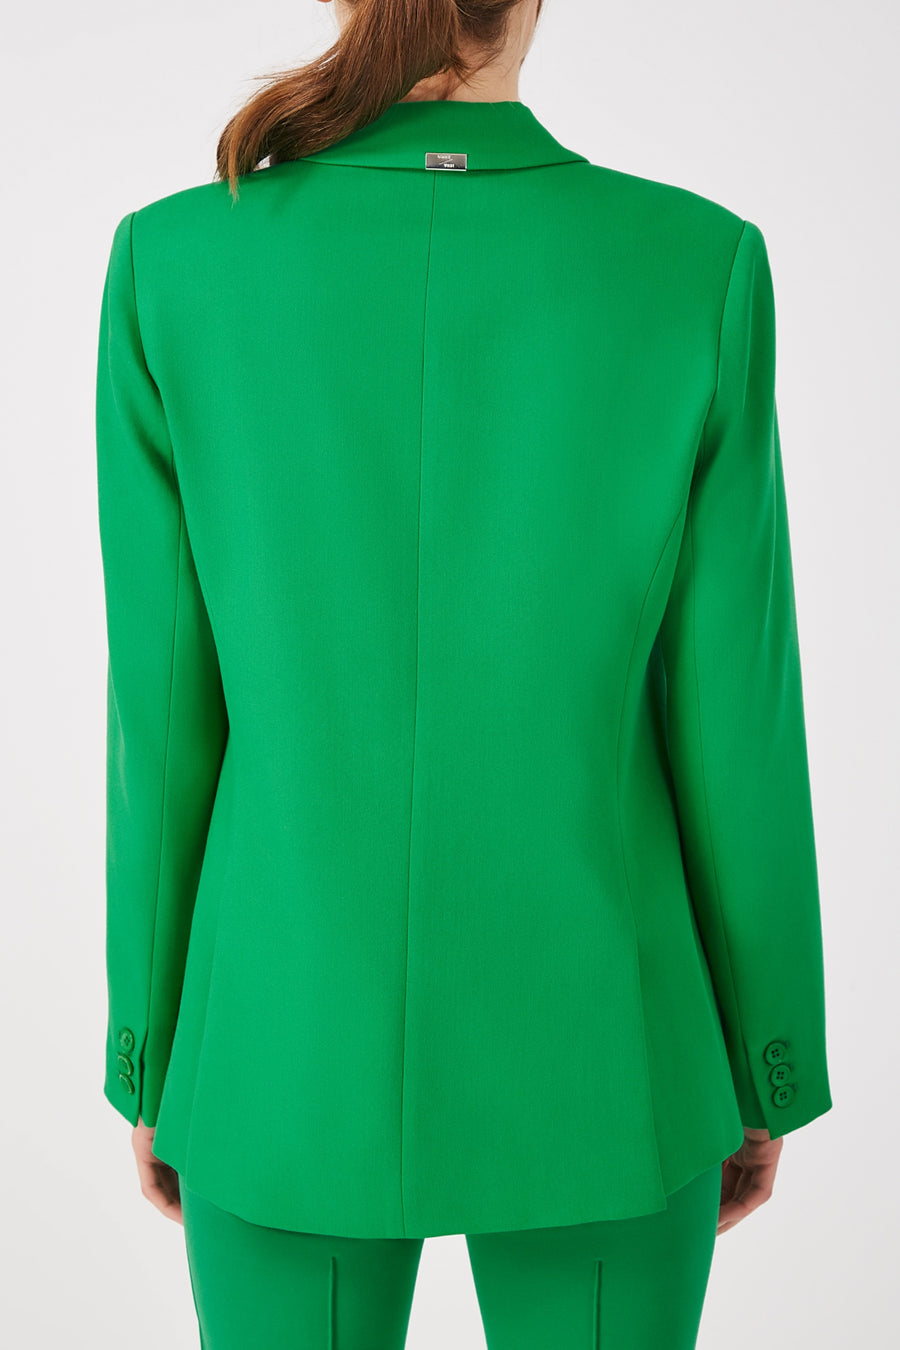 THE MULBERRY DOUBLE BREASTED BLAZER - KELLY GREEN